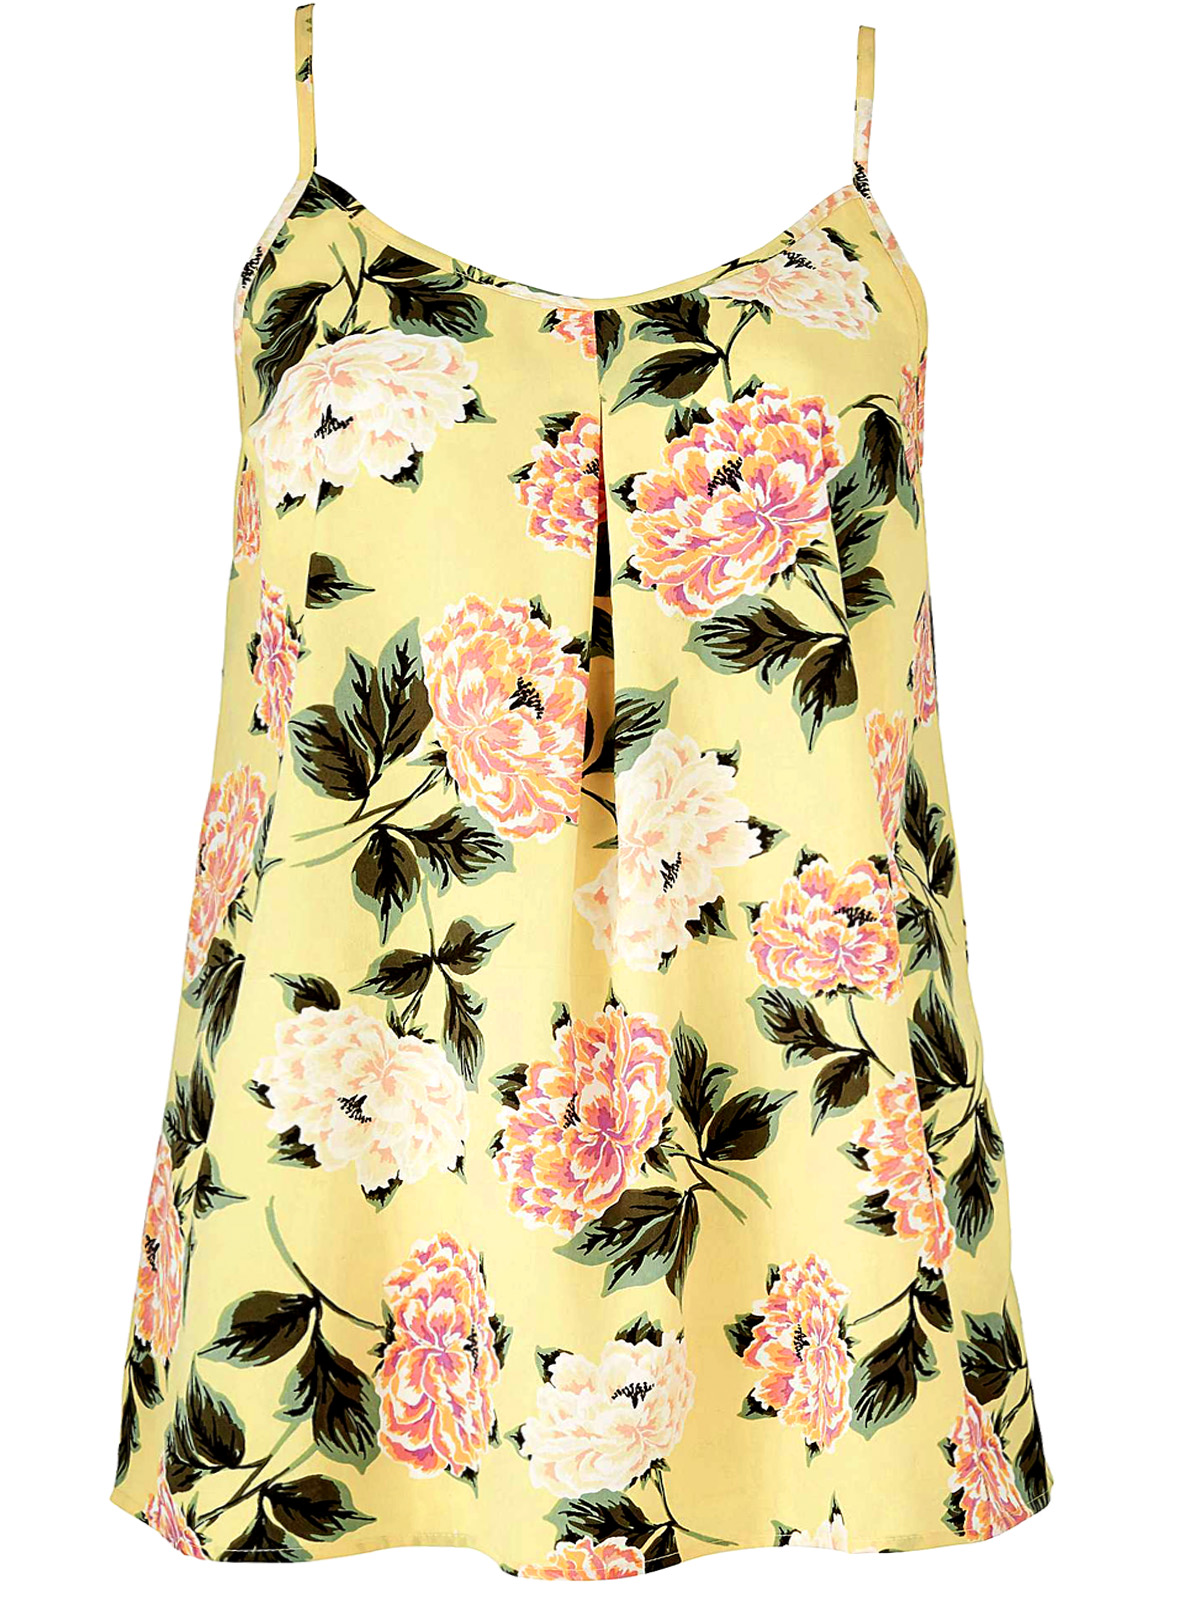 Capsule - - Capsule YELLOW Floral Print Strappy Cami Top - Size 10 to 22